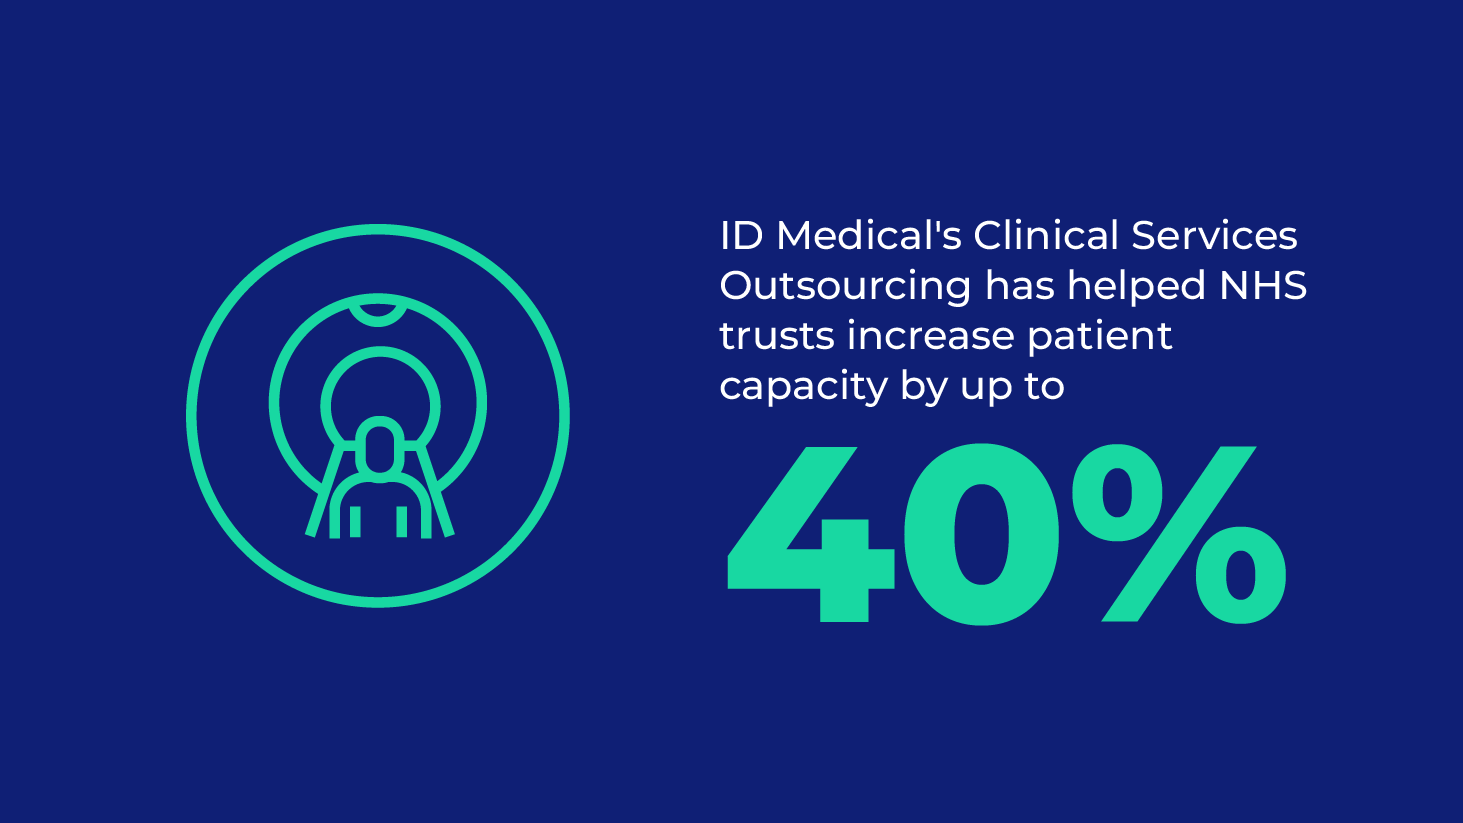 ID Medical Clinical Services outsourcing for NHS